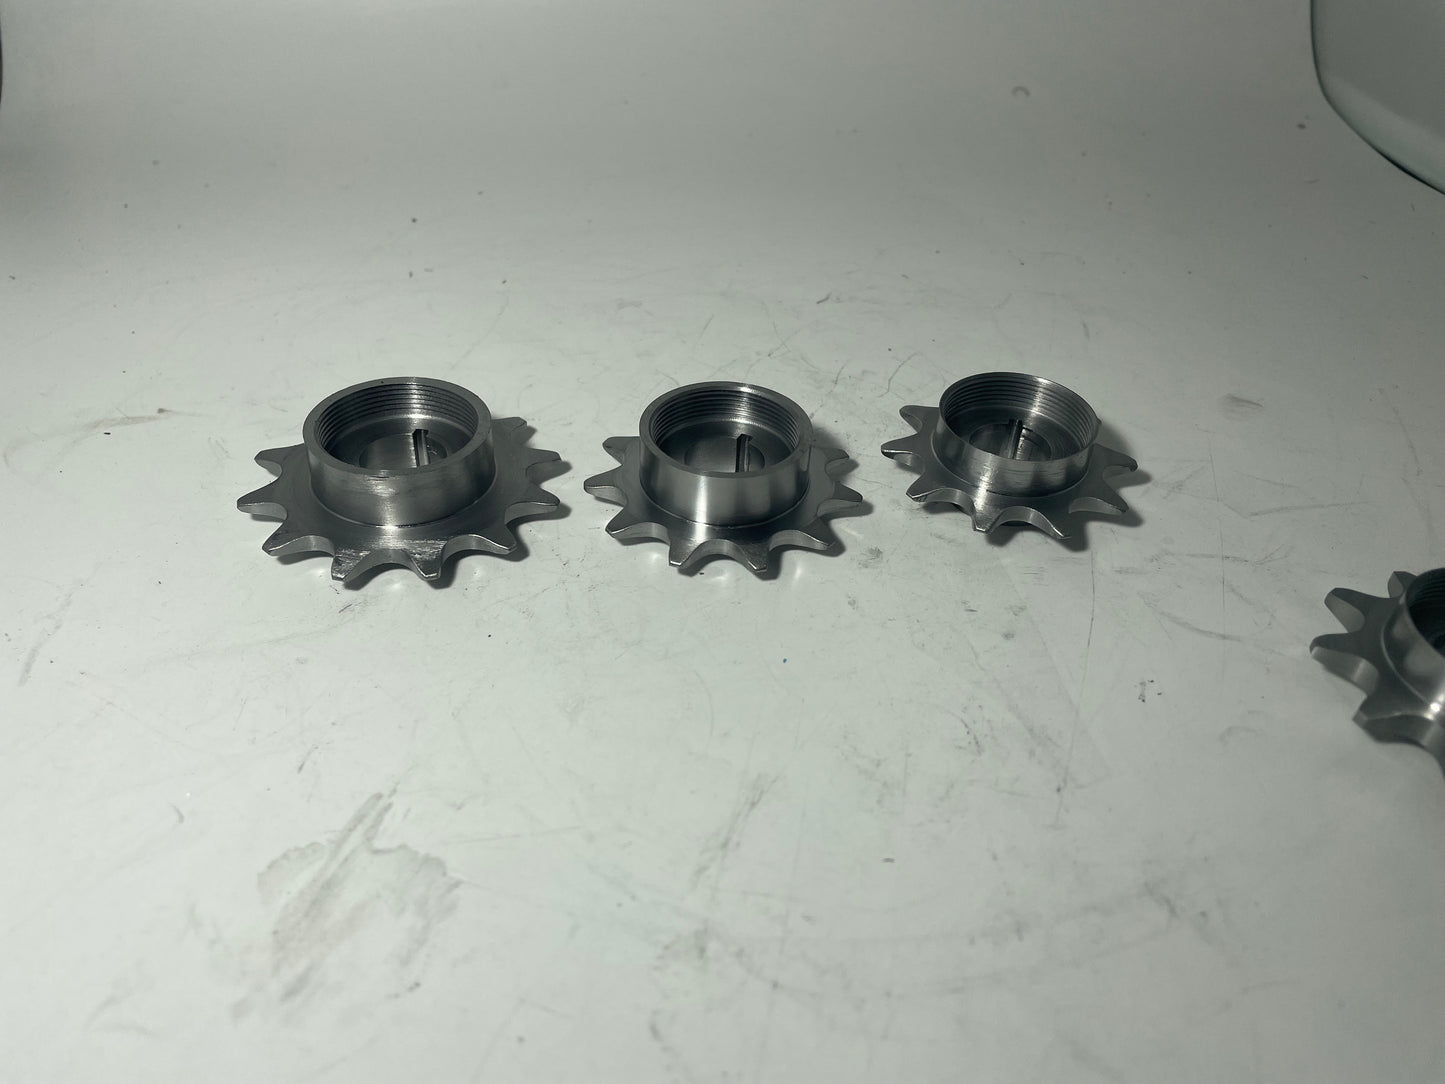 Offset Drive sprocket 10/11/12 tooth